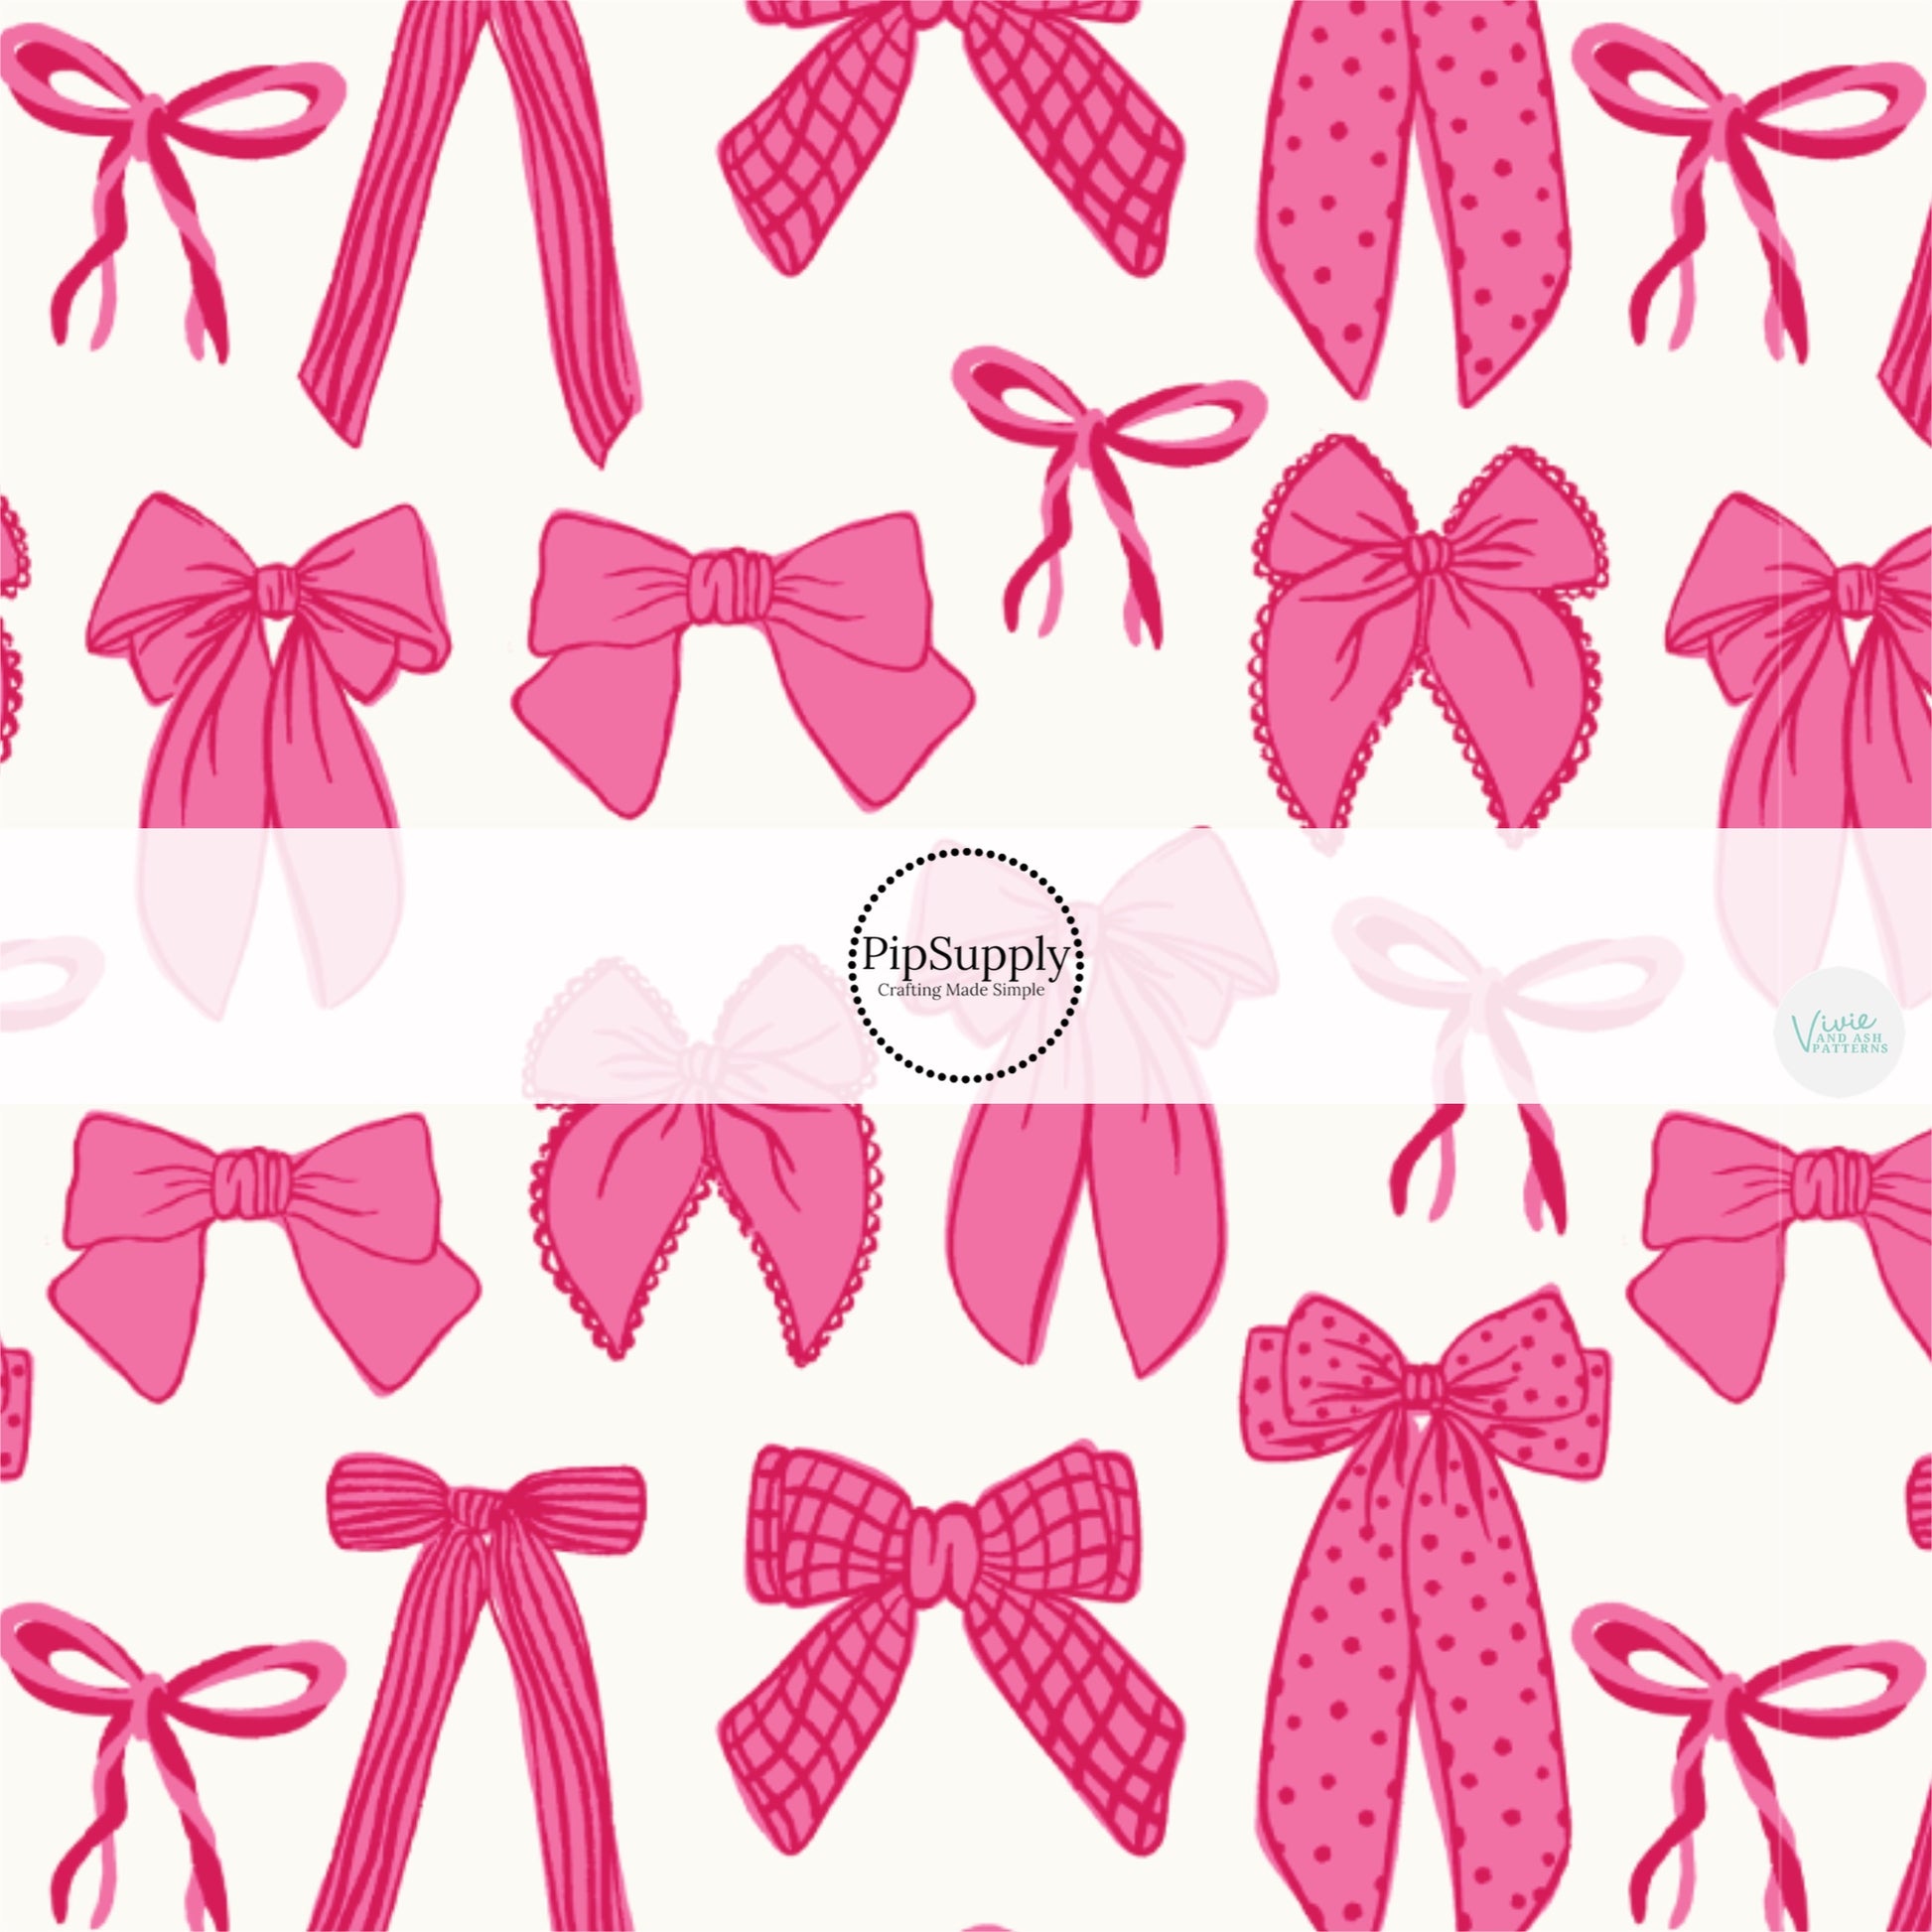 These spring bows themed no sew bow strips can be easily tied and attached to a clip for a finished hair bow. These patterned bow strips are great for personal use or to sell. These bow strips features hot pink multi ribbon bows.